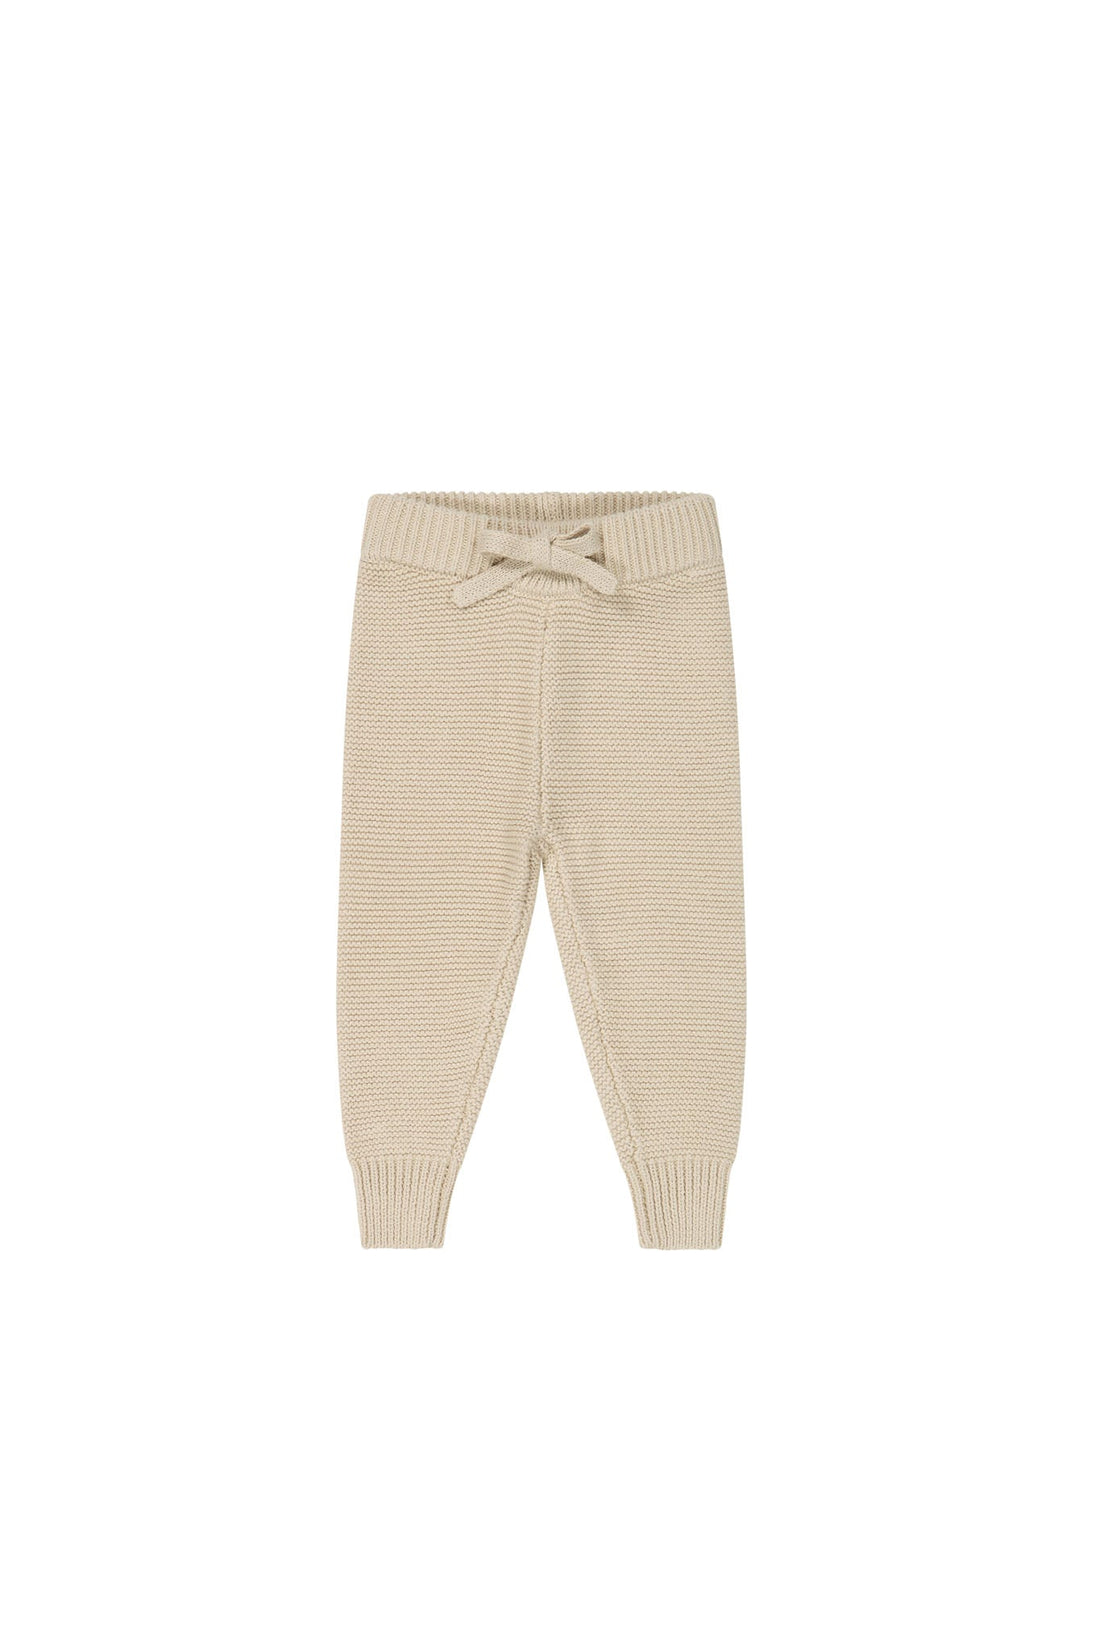 Ethan Pant - Sesame Childrens Pant from Jamie Kay NZ